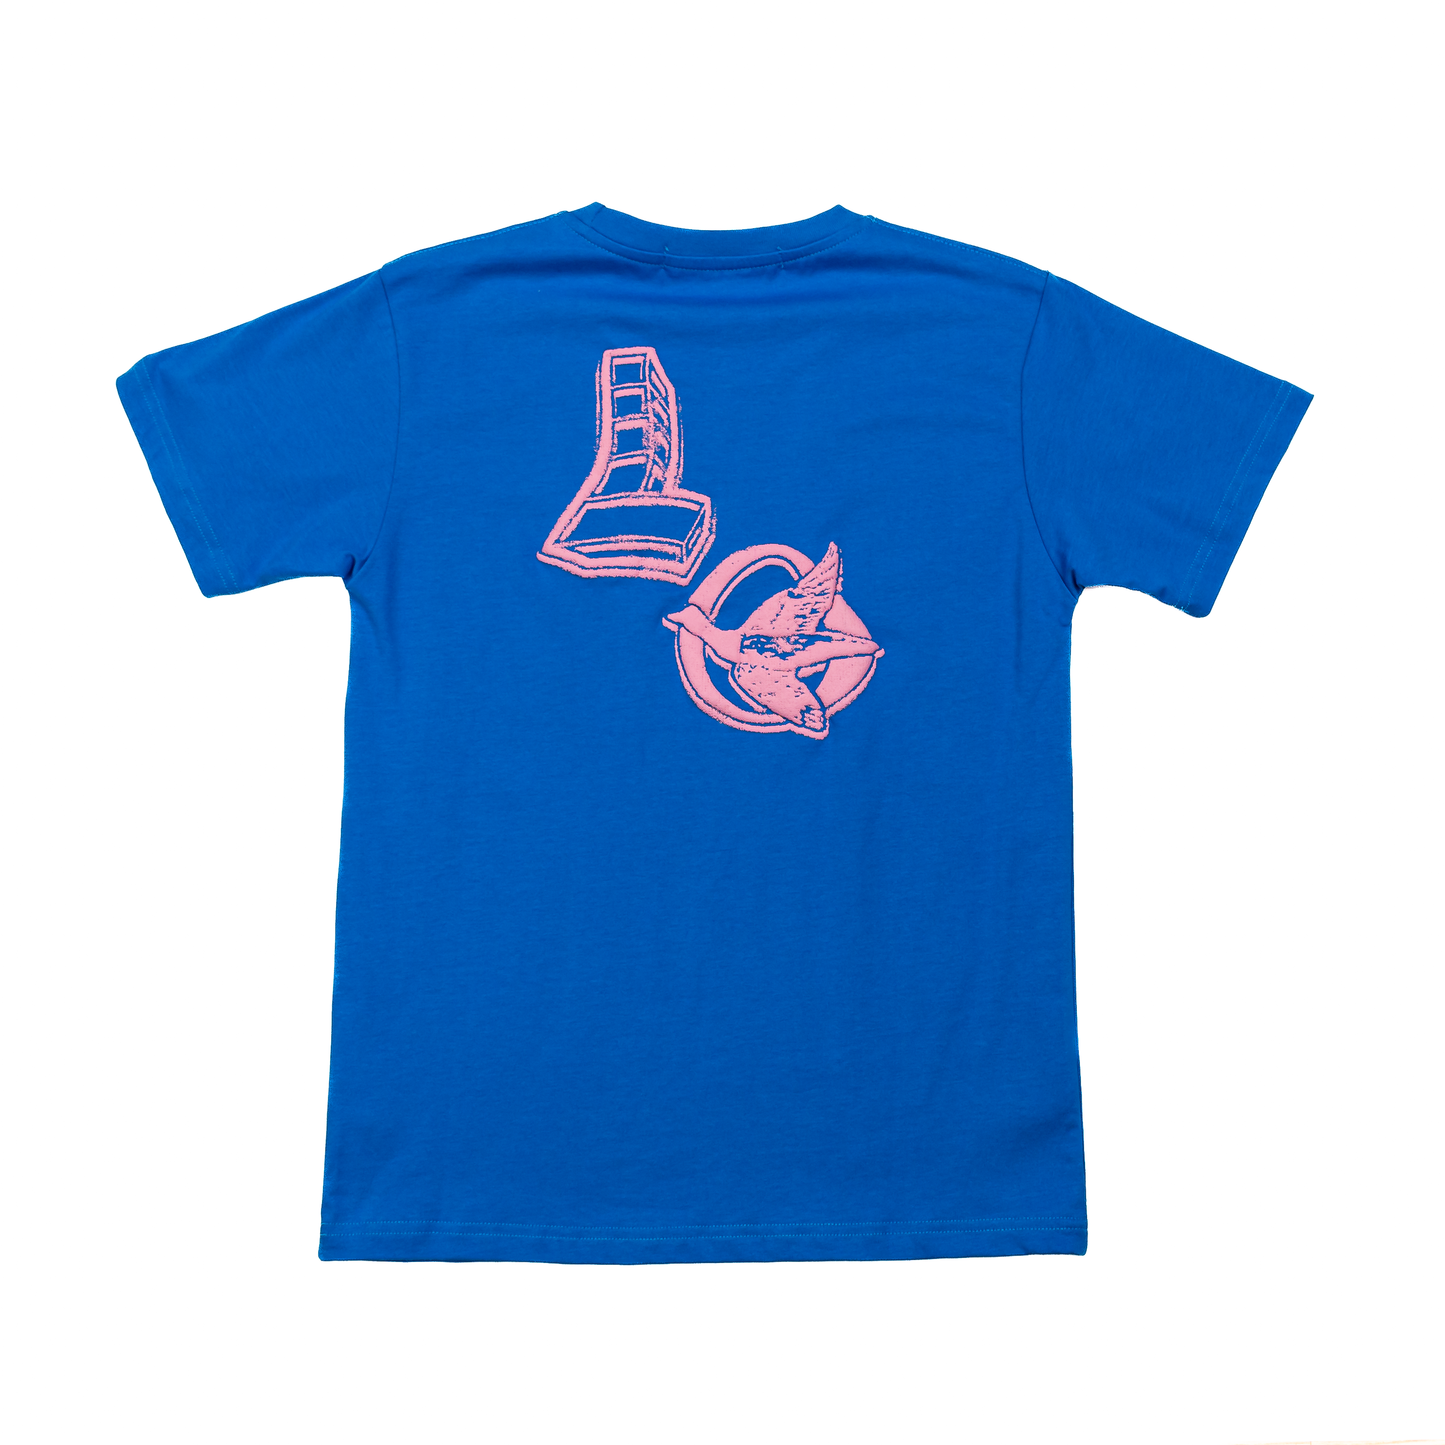 New LO Tee, Washed Blue - Layr Official